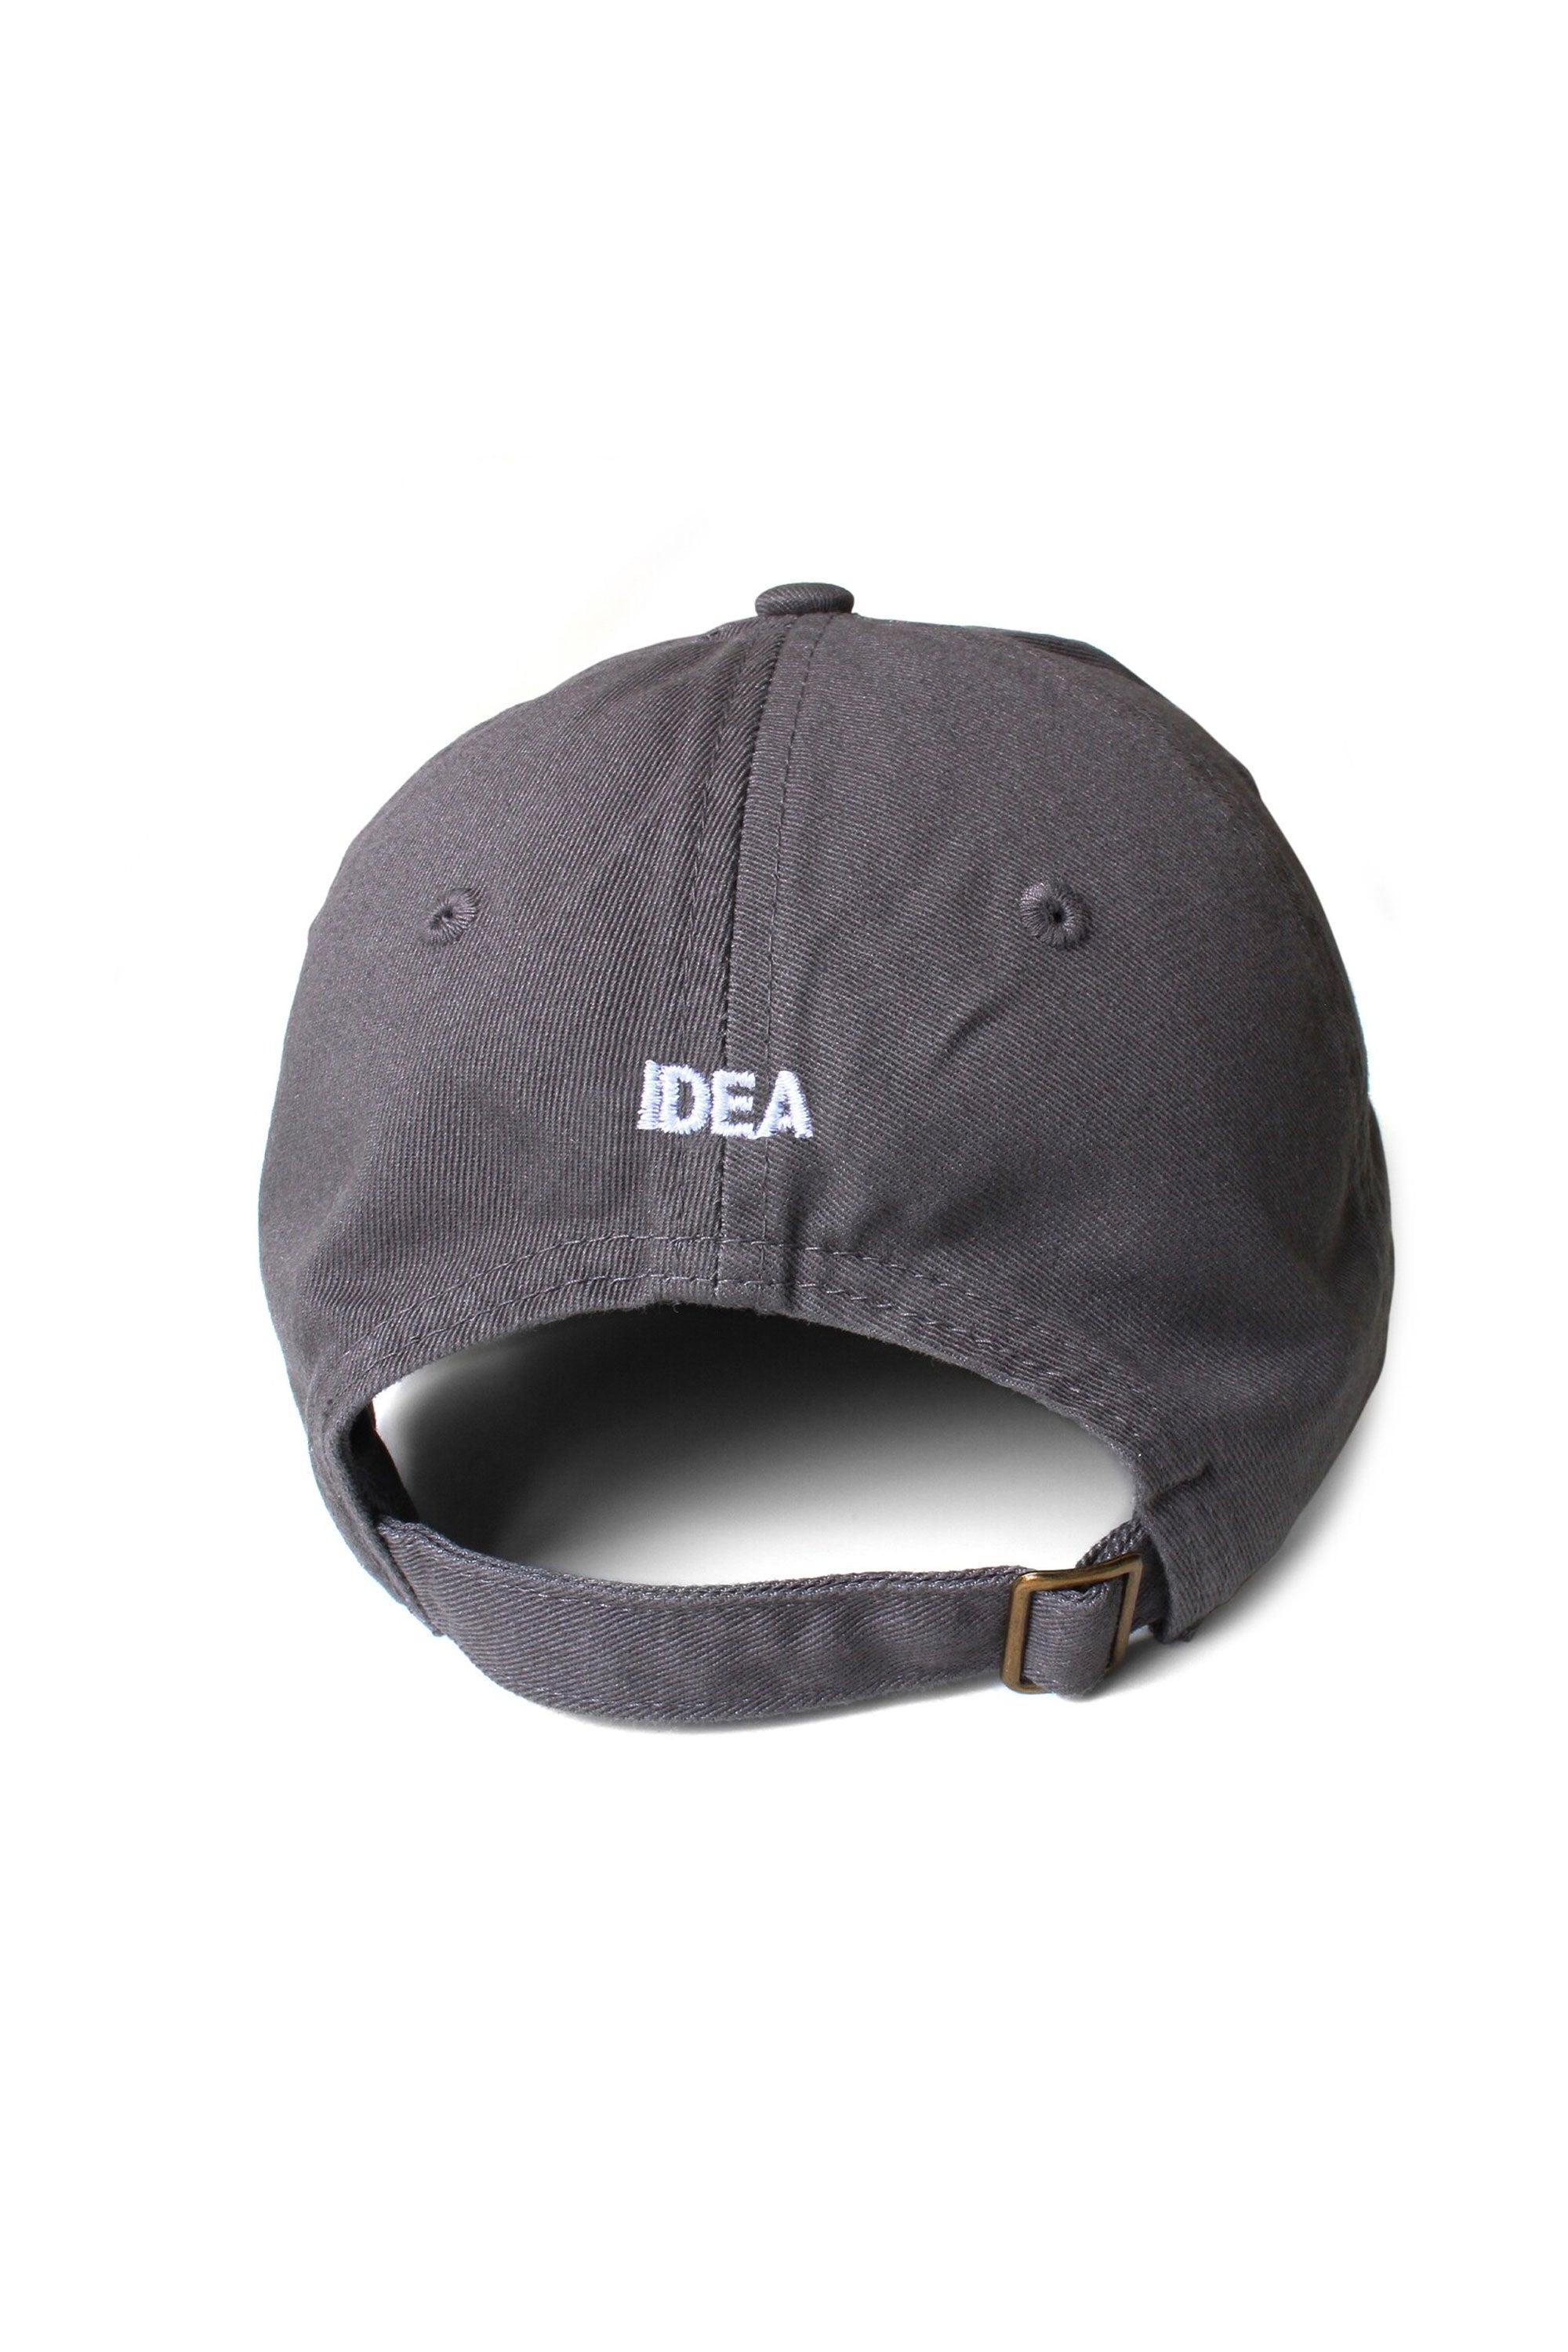 The IDEA - ALL ENGLAND TECHNO CLUB HAT  available online with global shipping, and in PAM Stores Melbourne and Sydney.